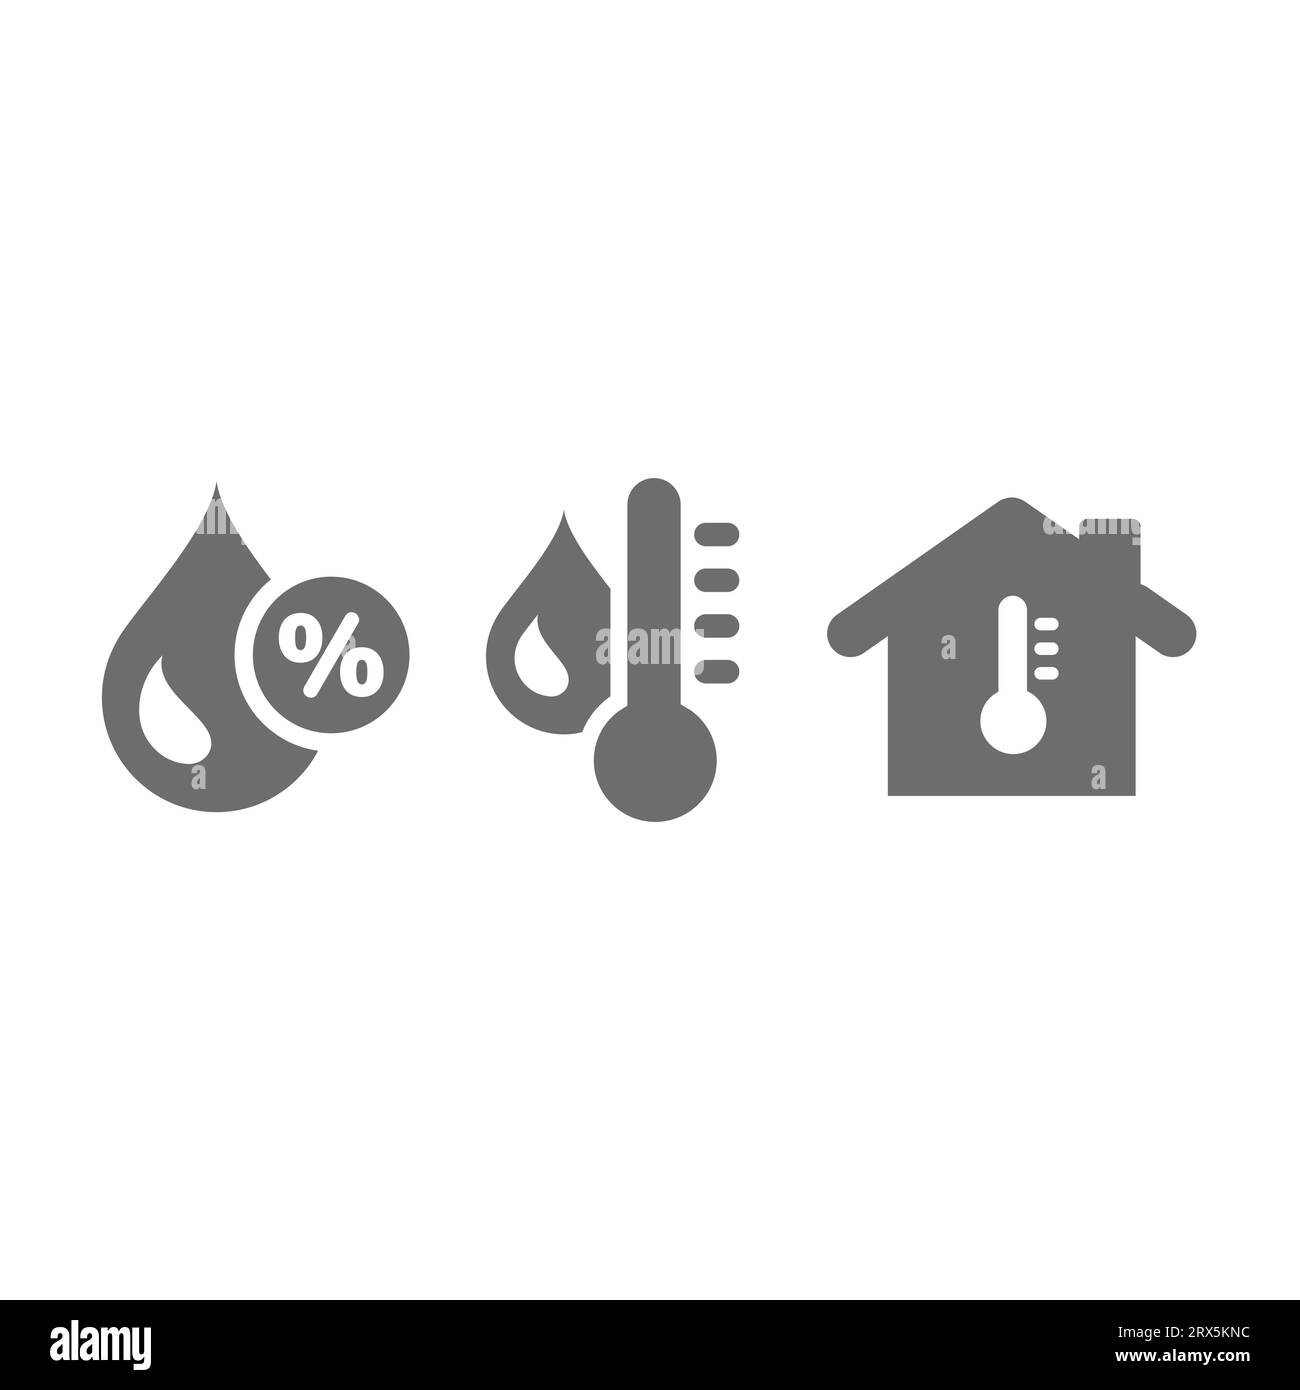 Humidity control with thermometer and home icons. Humidity percent with water drop icon set. Stock Vector